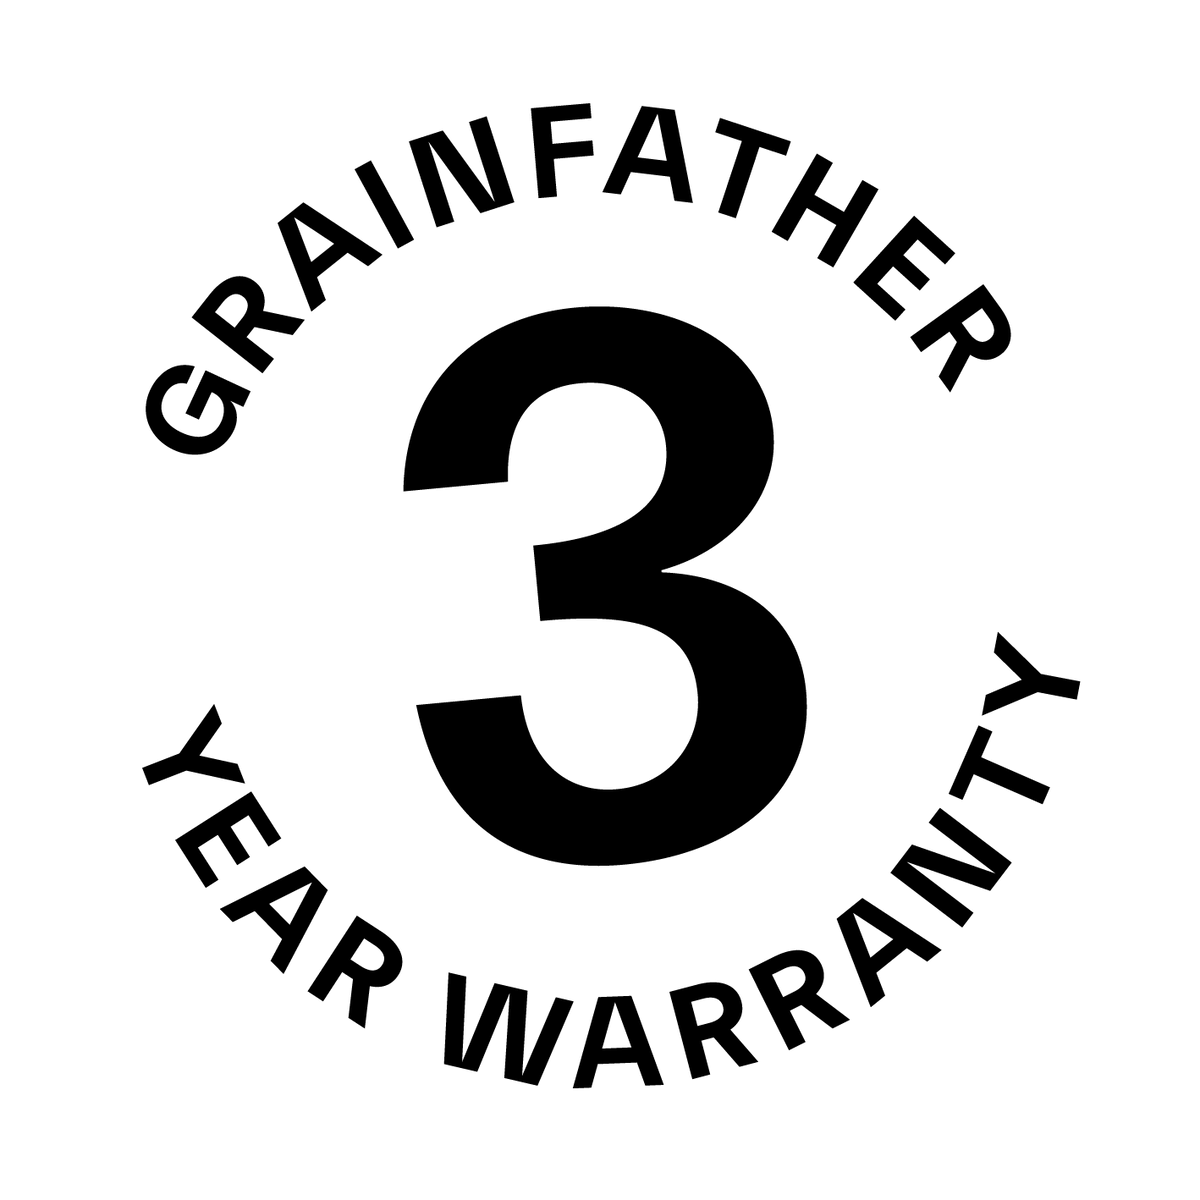 Grainfather G40 - All Things Fermented | Home Brew Shop NZ | Supplies | Equipment